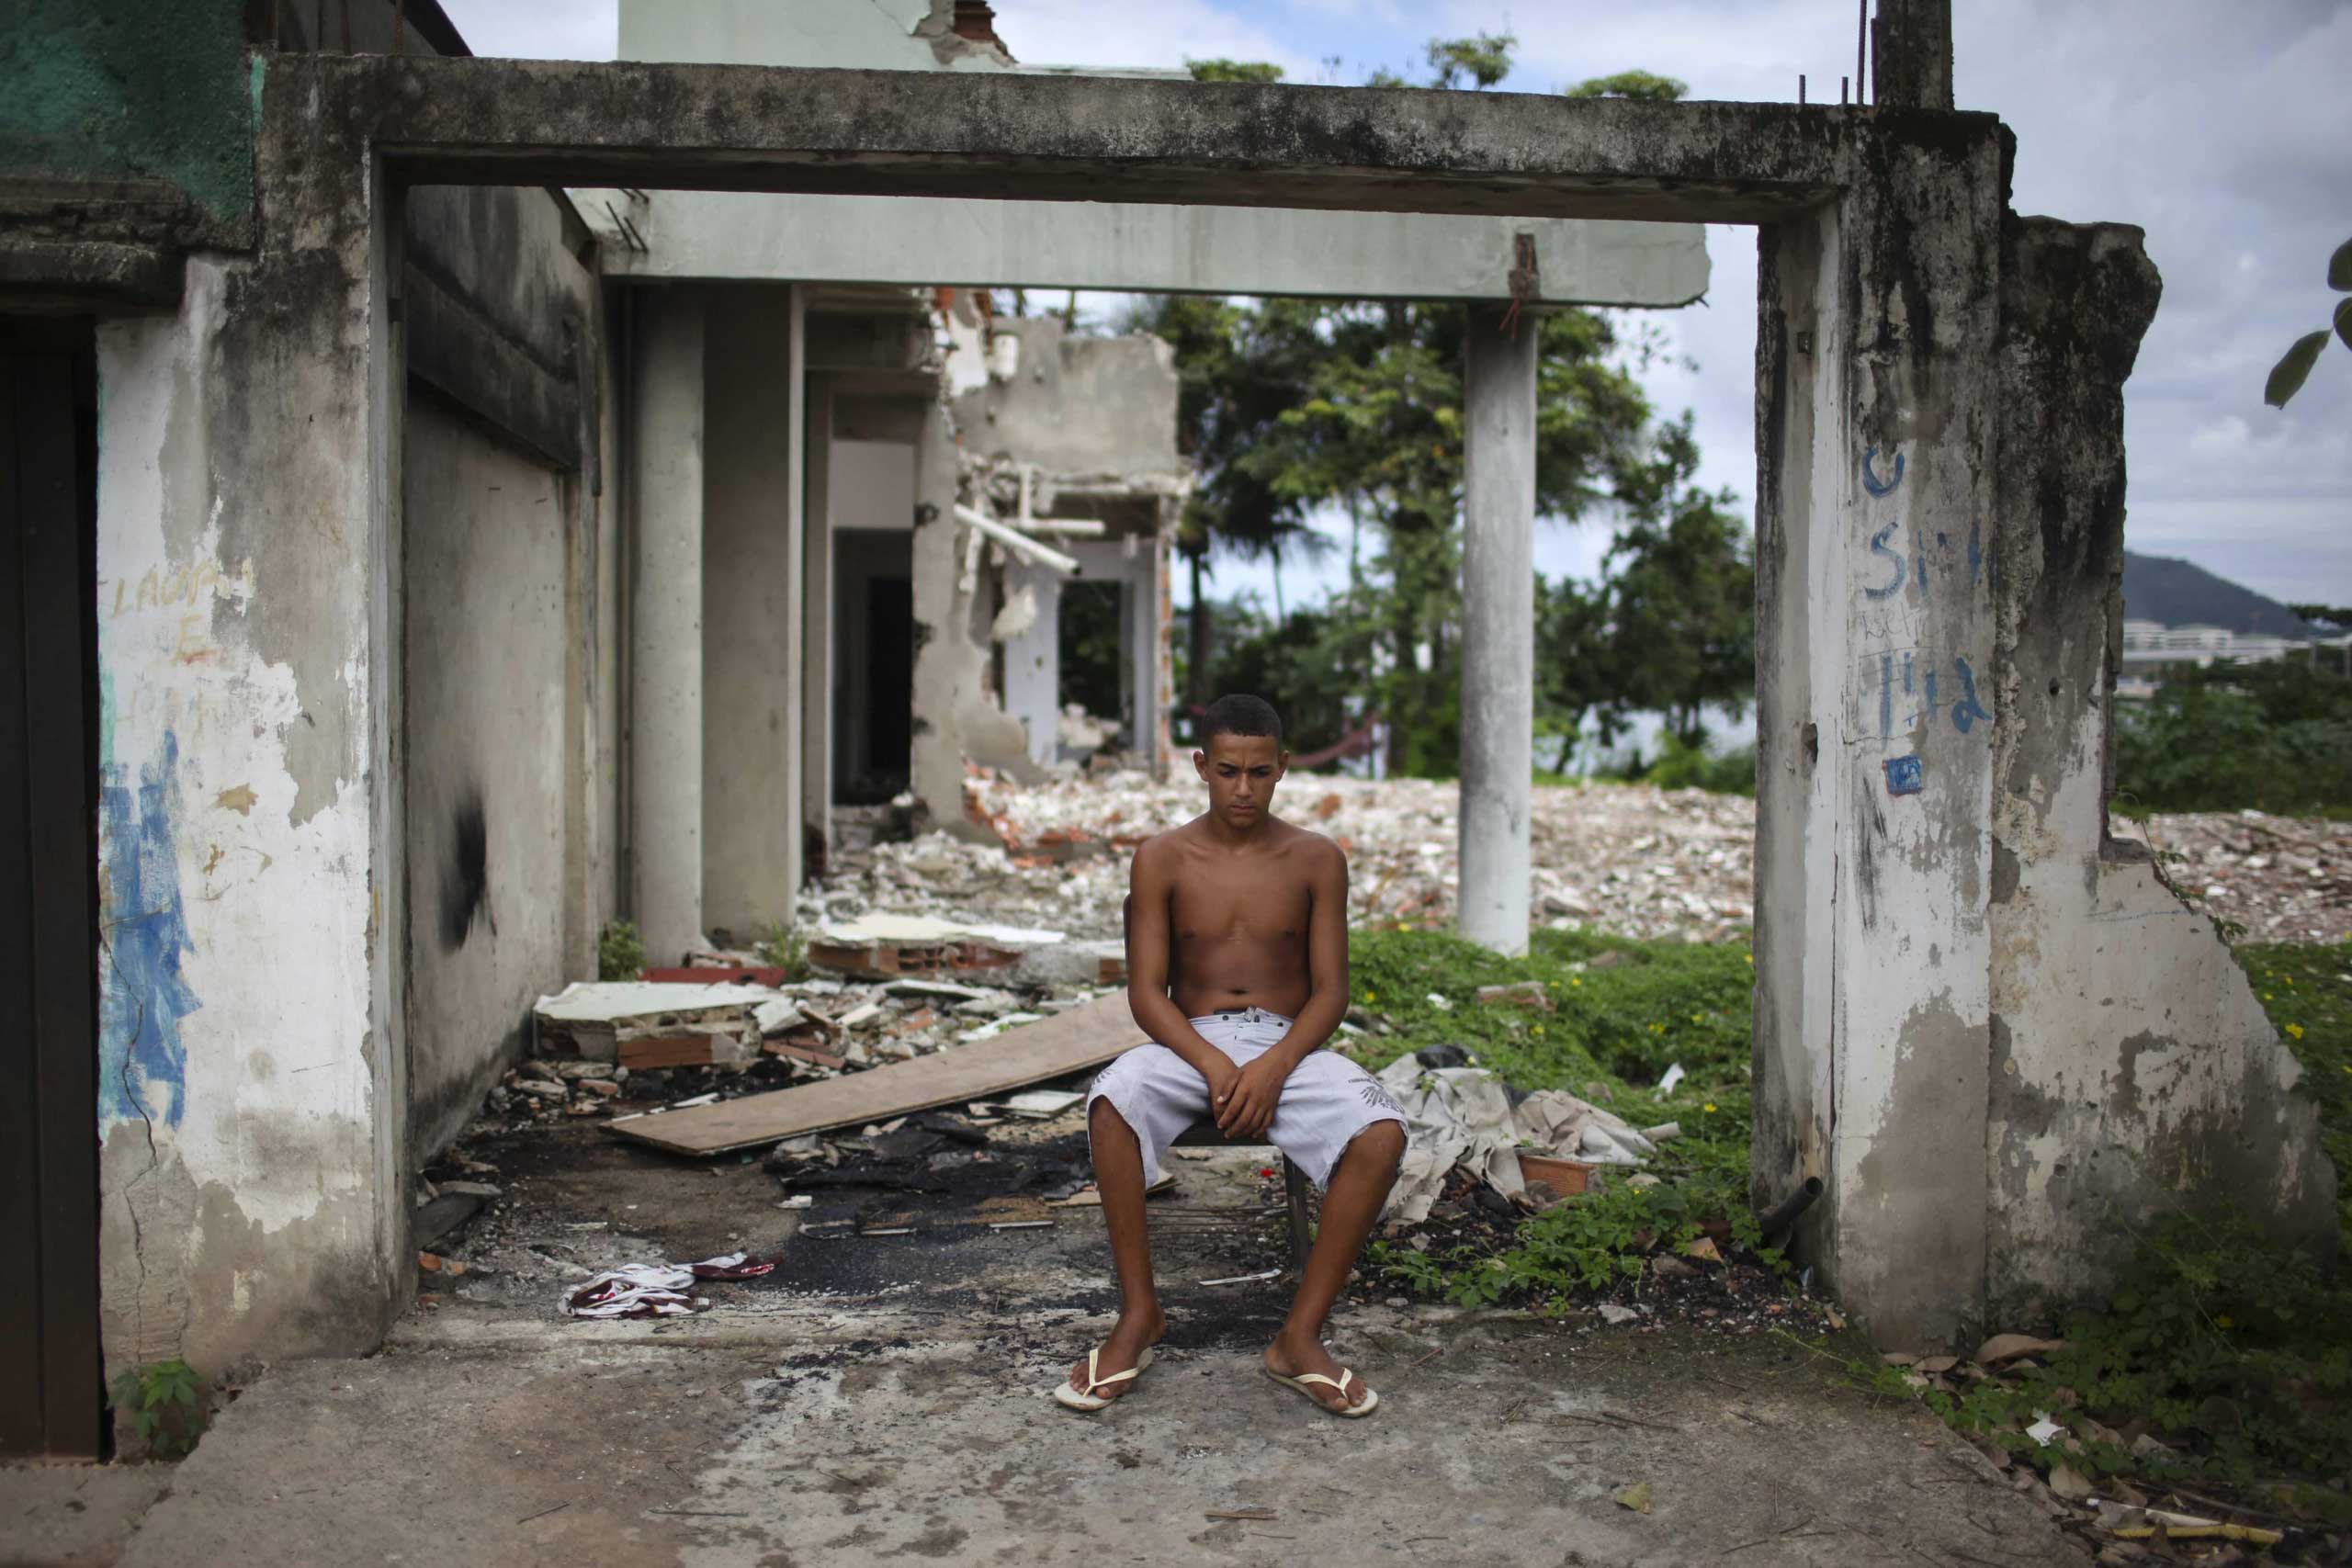 A young man rests next to a destroyed house at the shanty town Vila Autodromo, which is located close to the Olympic Park built for the Olympic Games Rio 2016, in Rio de Janeiro, Brazil, on 01 April 2015. (Antonio Lacerda–EPA)